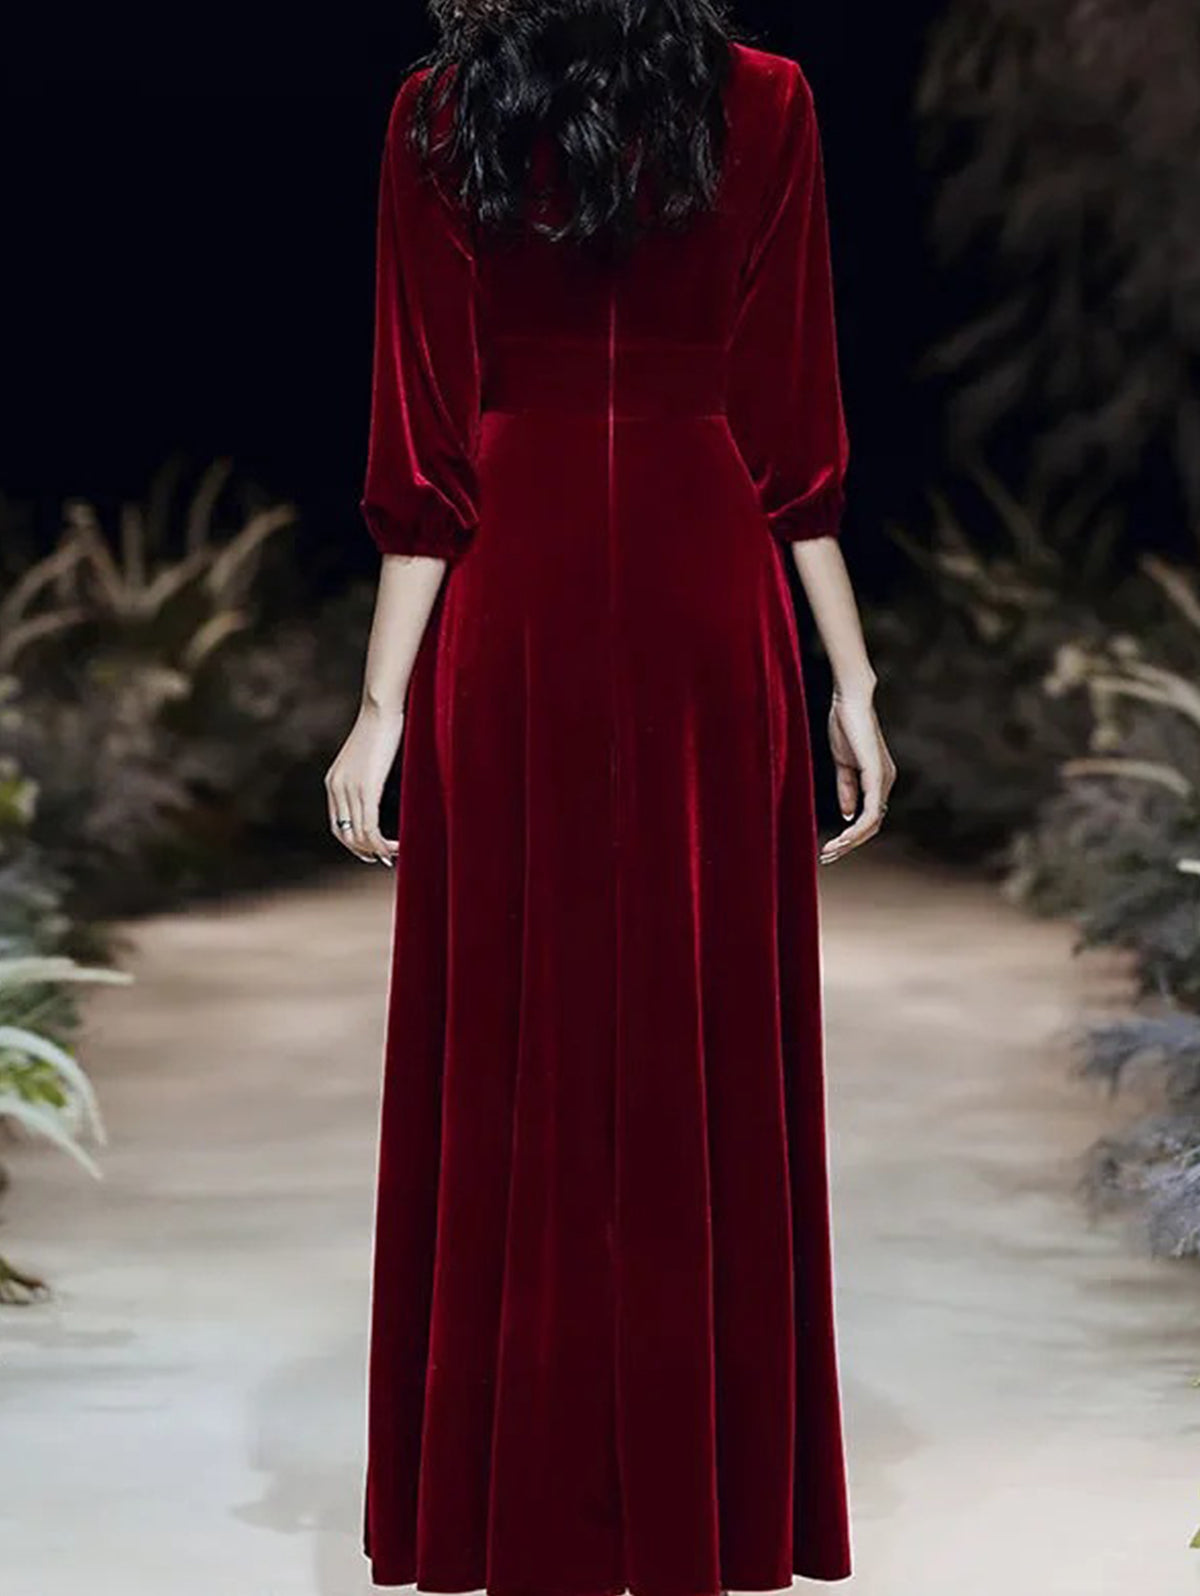 Velvet Evening Gown with Three Quarter Sleeves - Try Modest Limited 